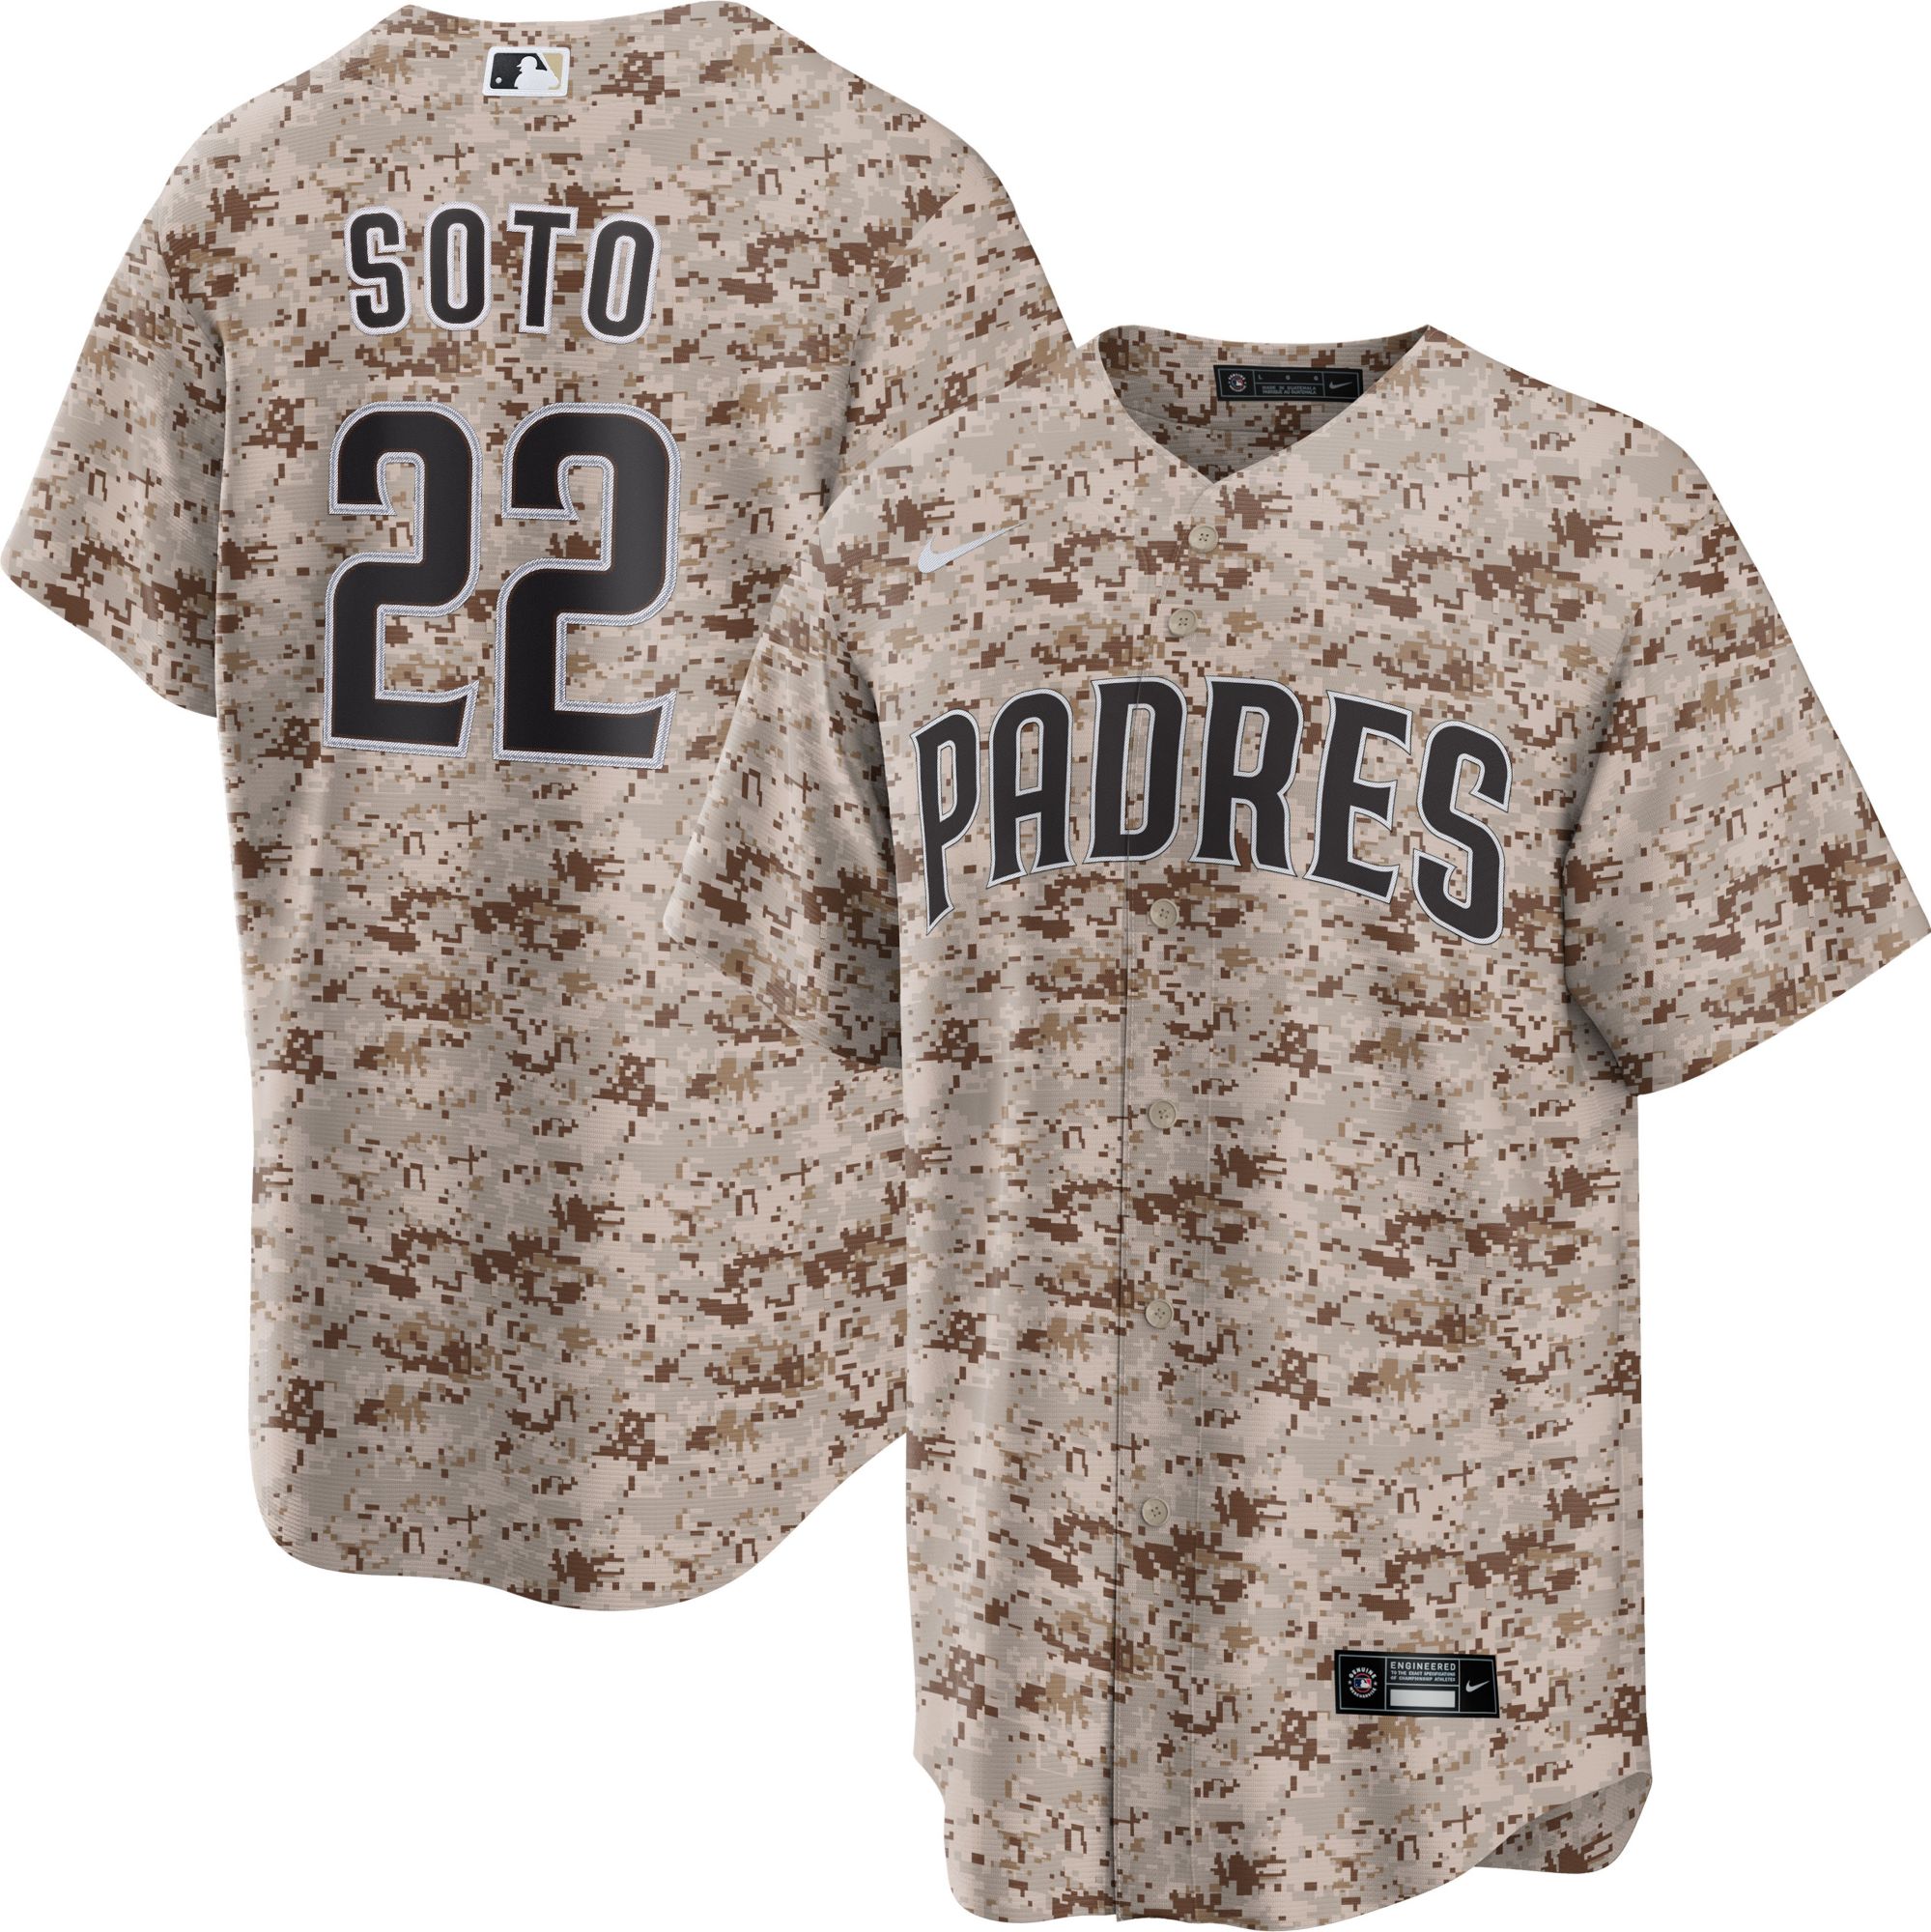 San Diego Padres on X: Juan Soto City Connect Shirt? Sign me up! 🏝 Grab  this new giveaway item on September 7:    / X